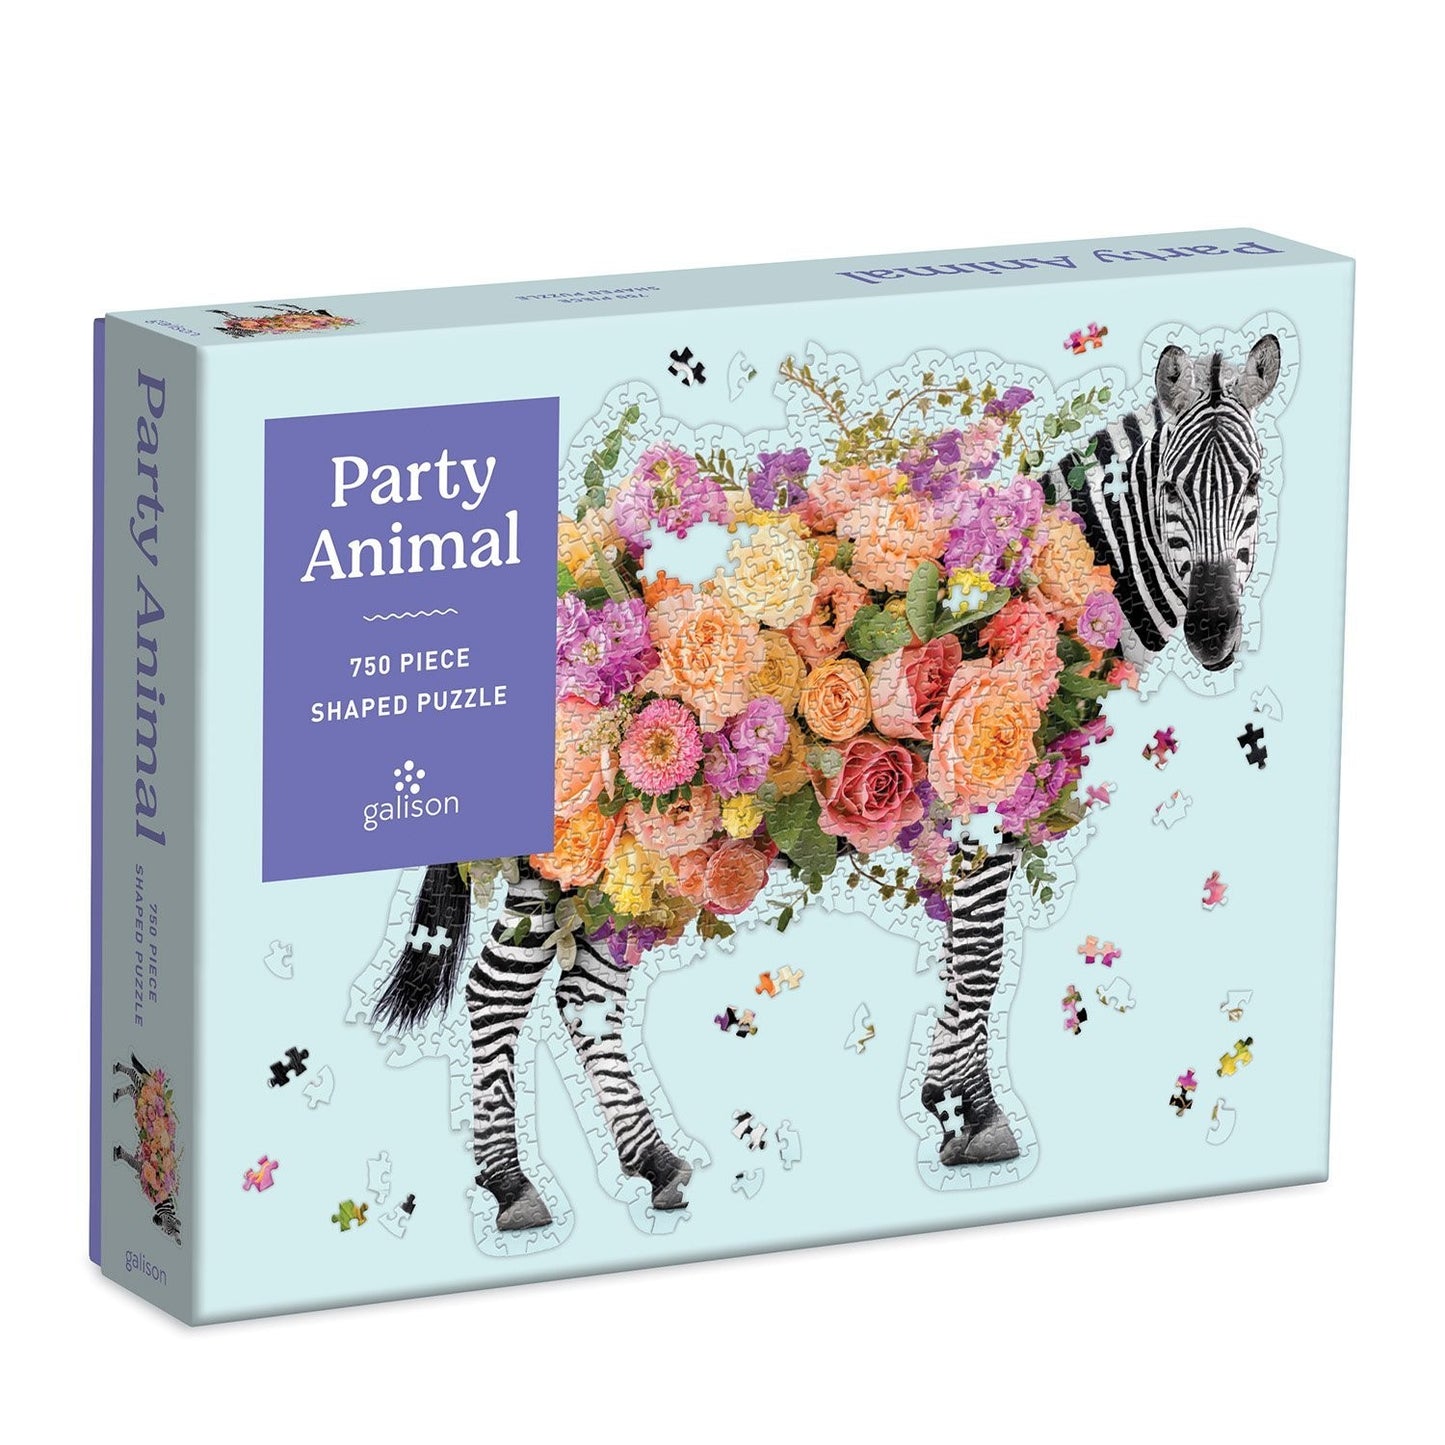 Party Animal 750 Piece Shaped Jigsaw Puzzle